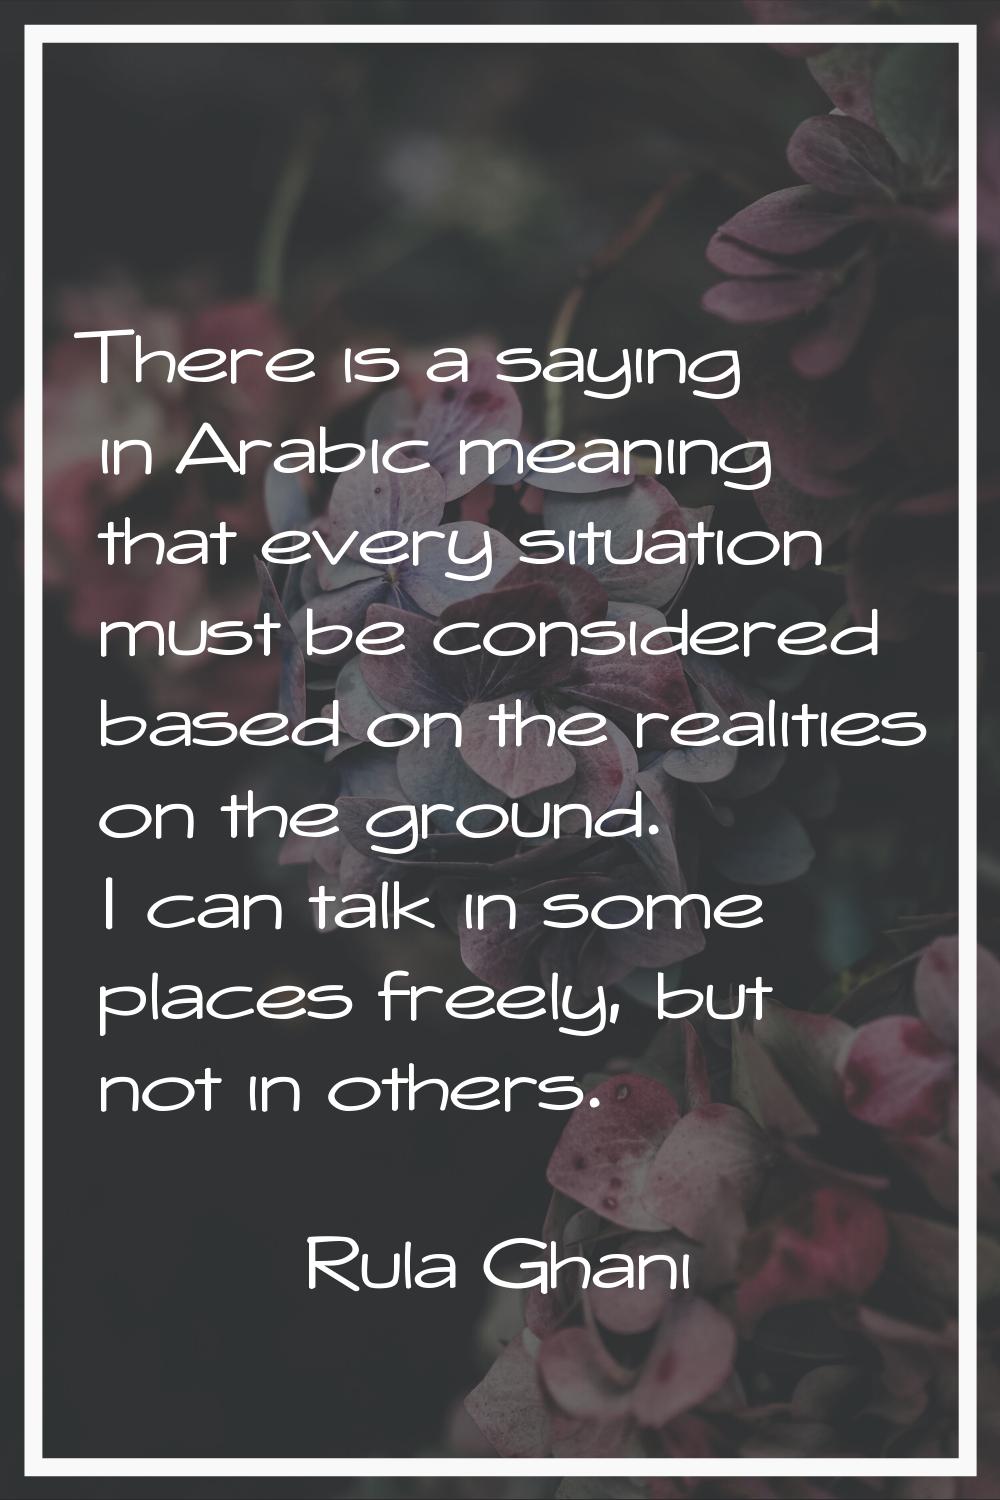 There is a saying in Arabic meaning that every situation must be considered based on the realities 